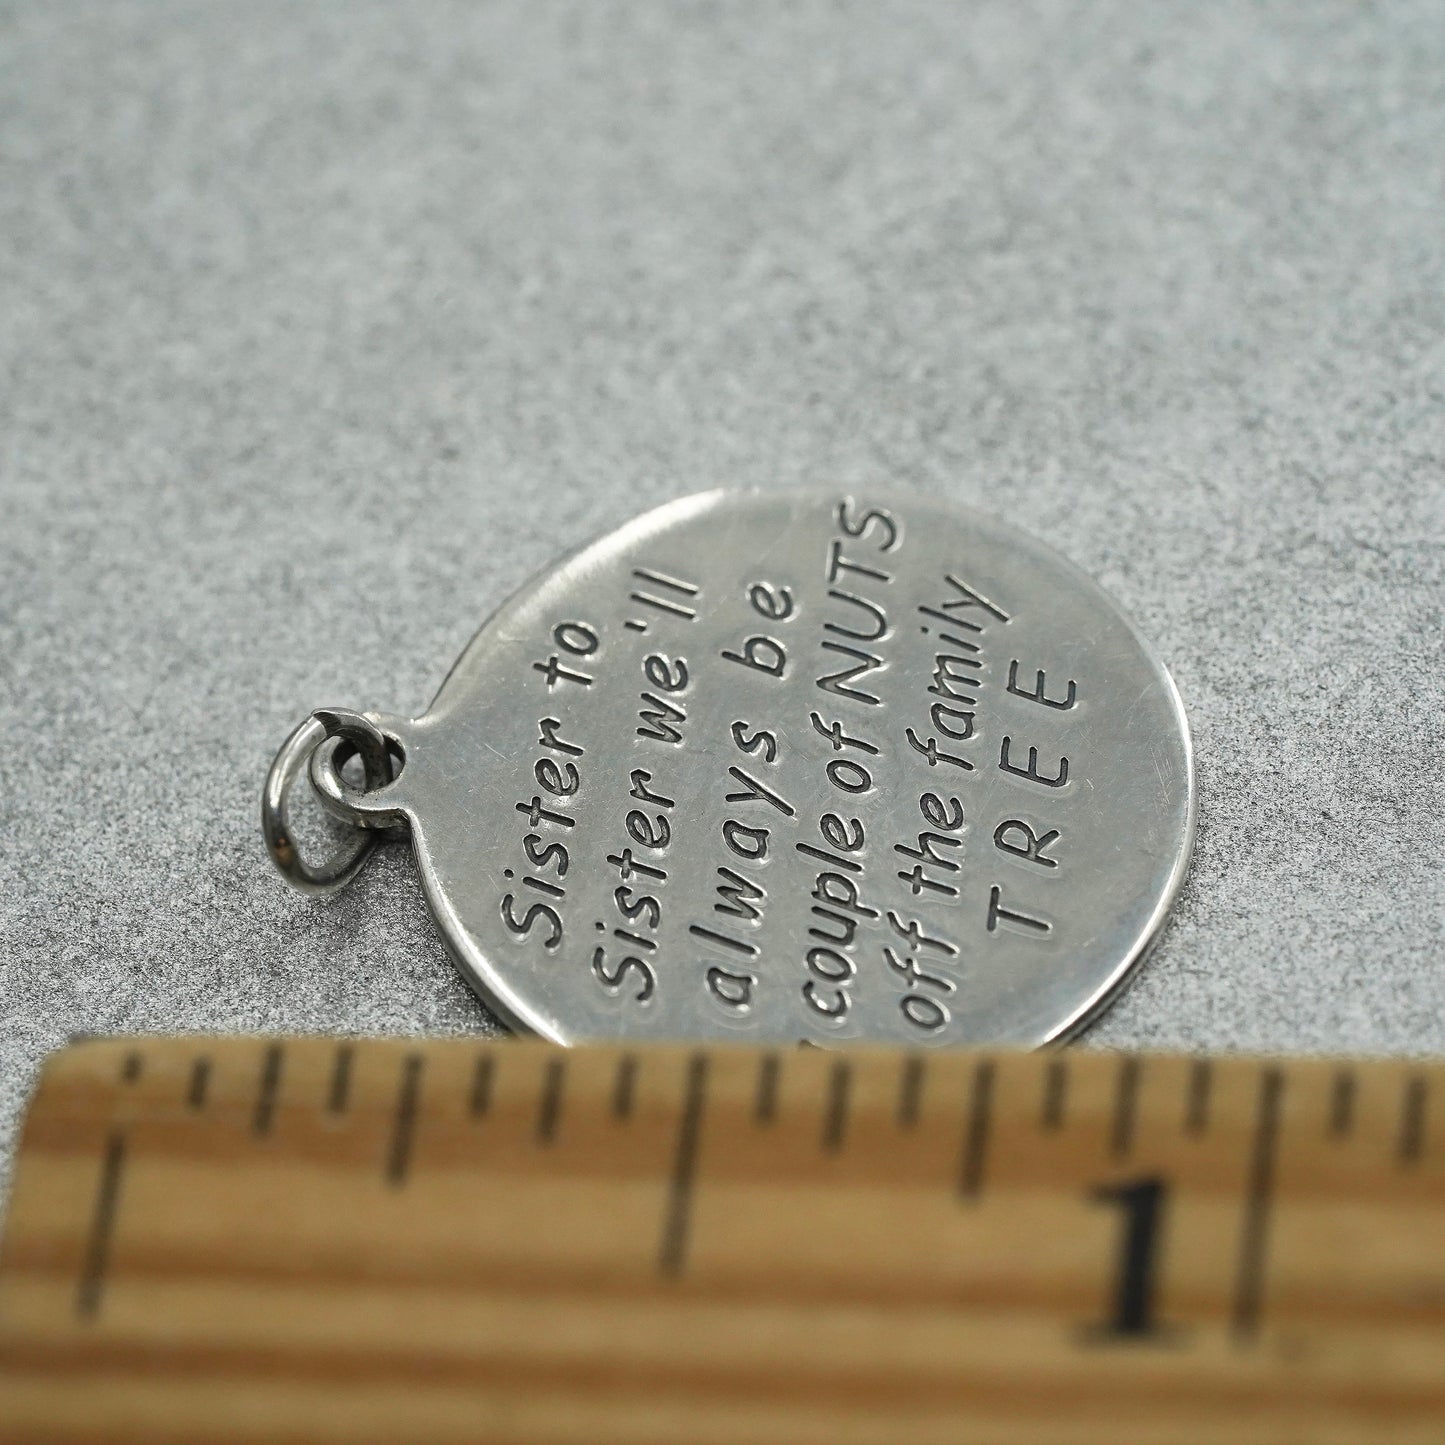 Sterling 925 silver charm, “sister to sister couple of Nuts off the family tree